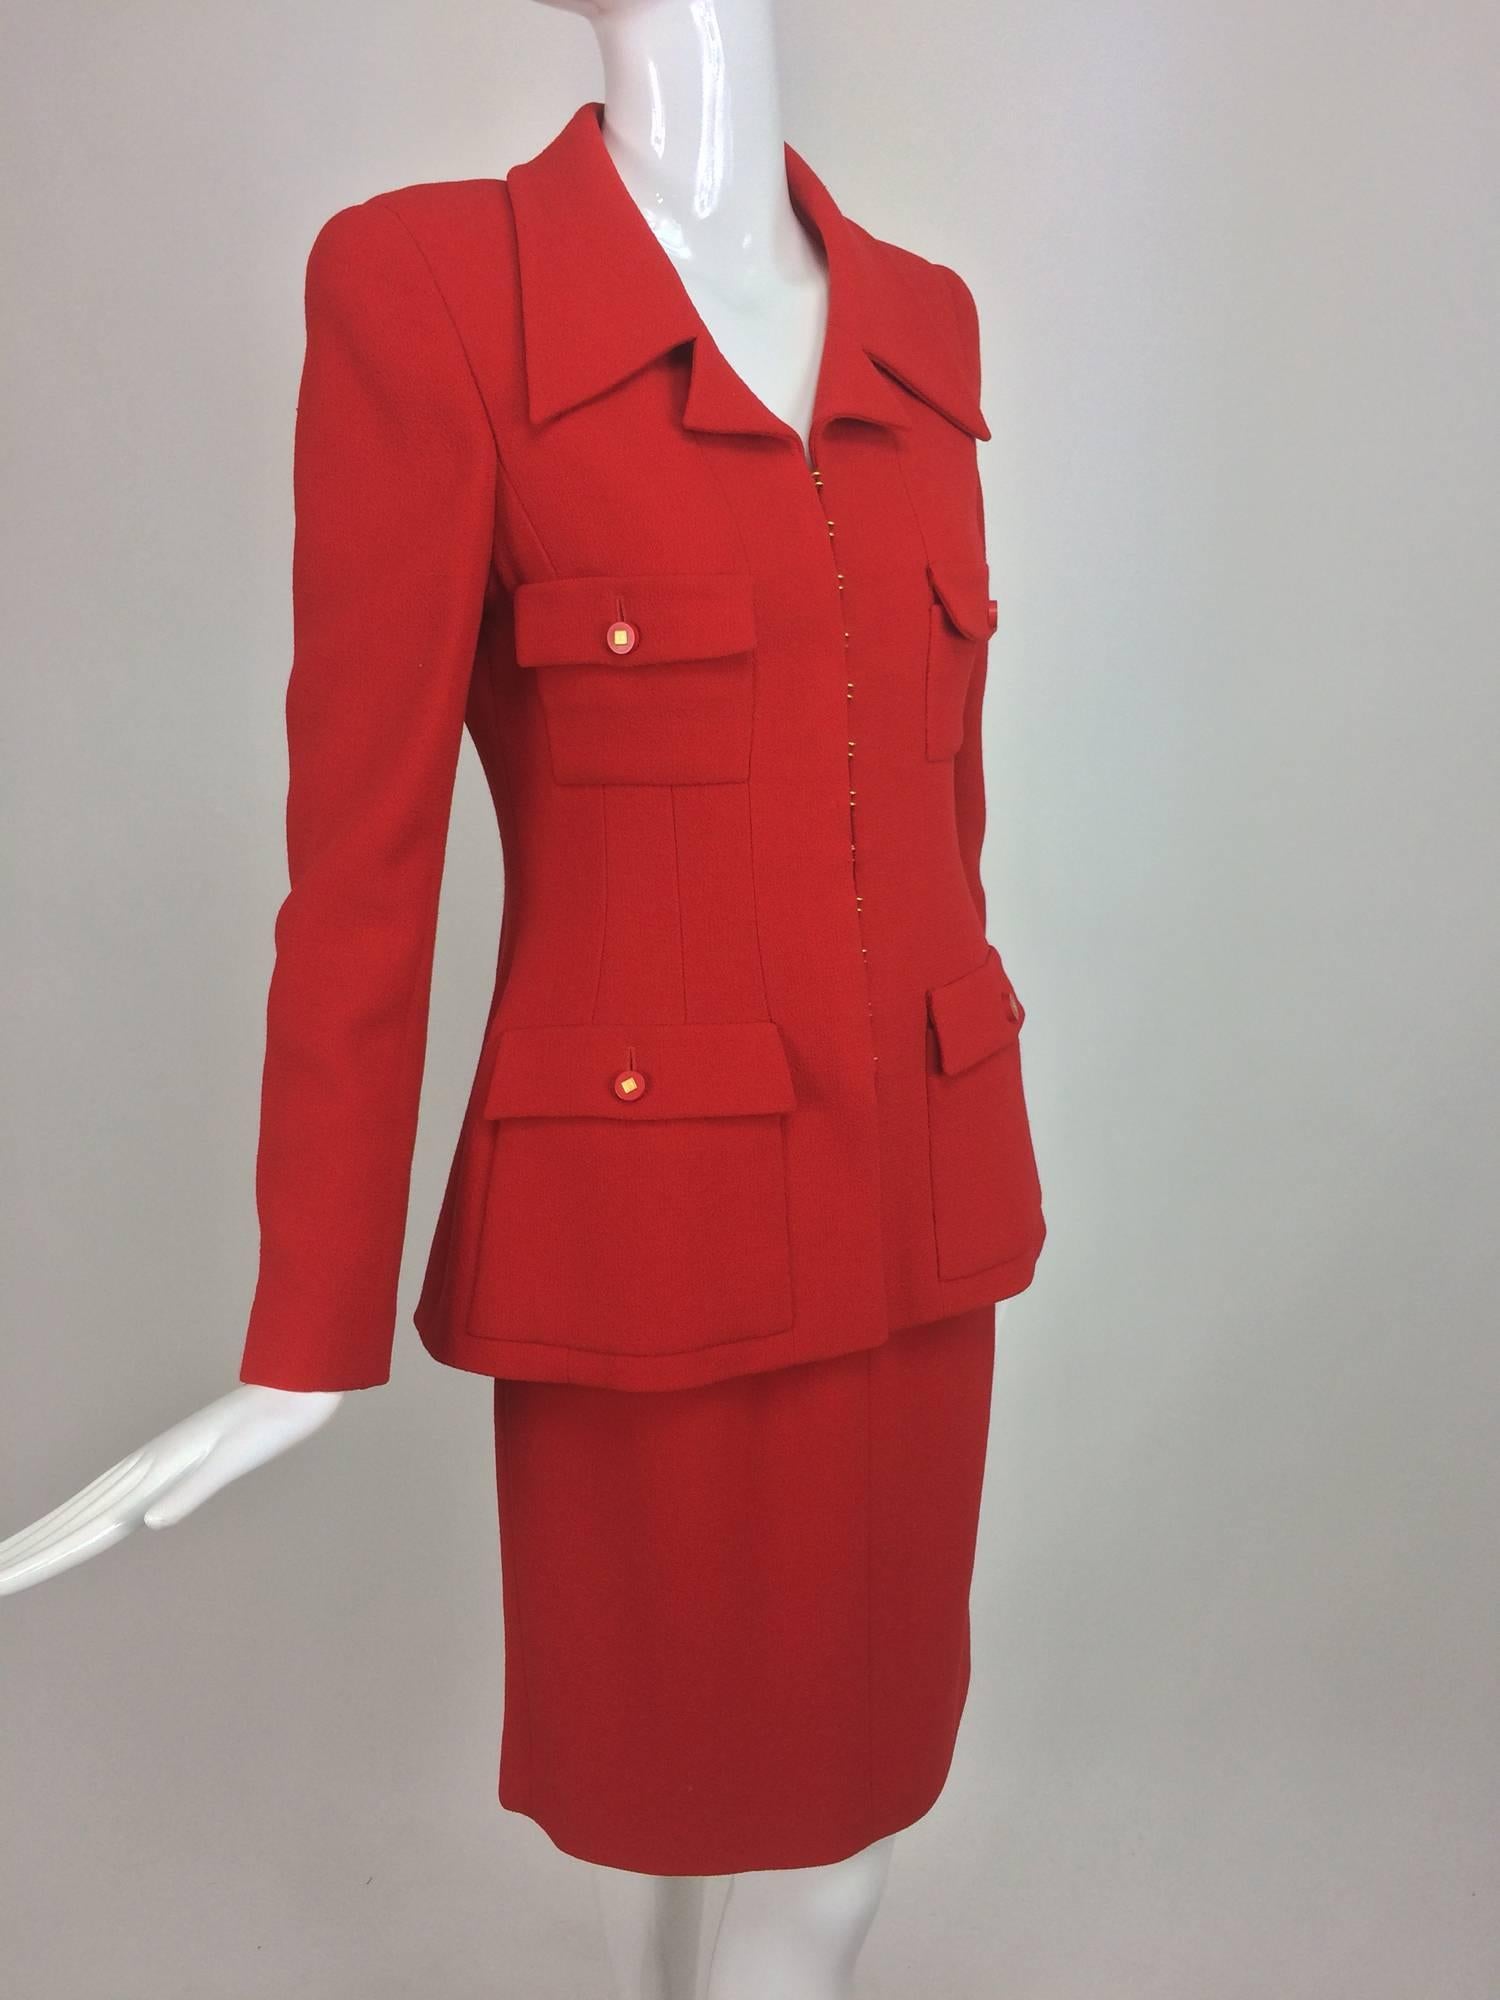 Women's Vintage Chanel fire engine red wool military inspired suit 1996A